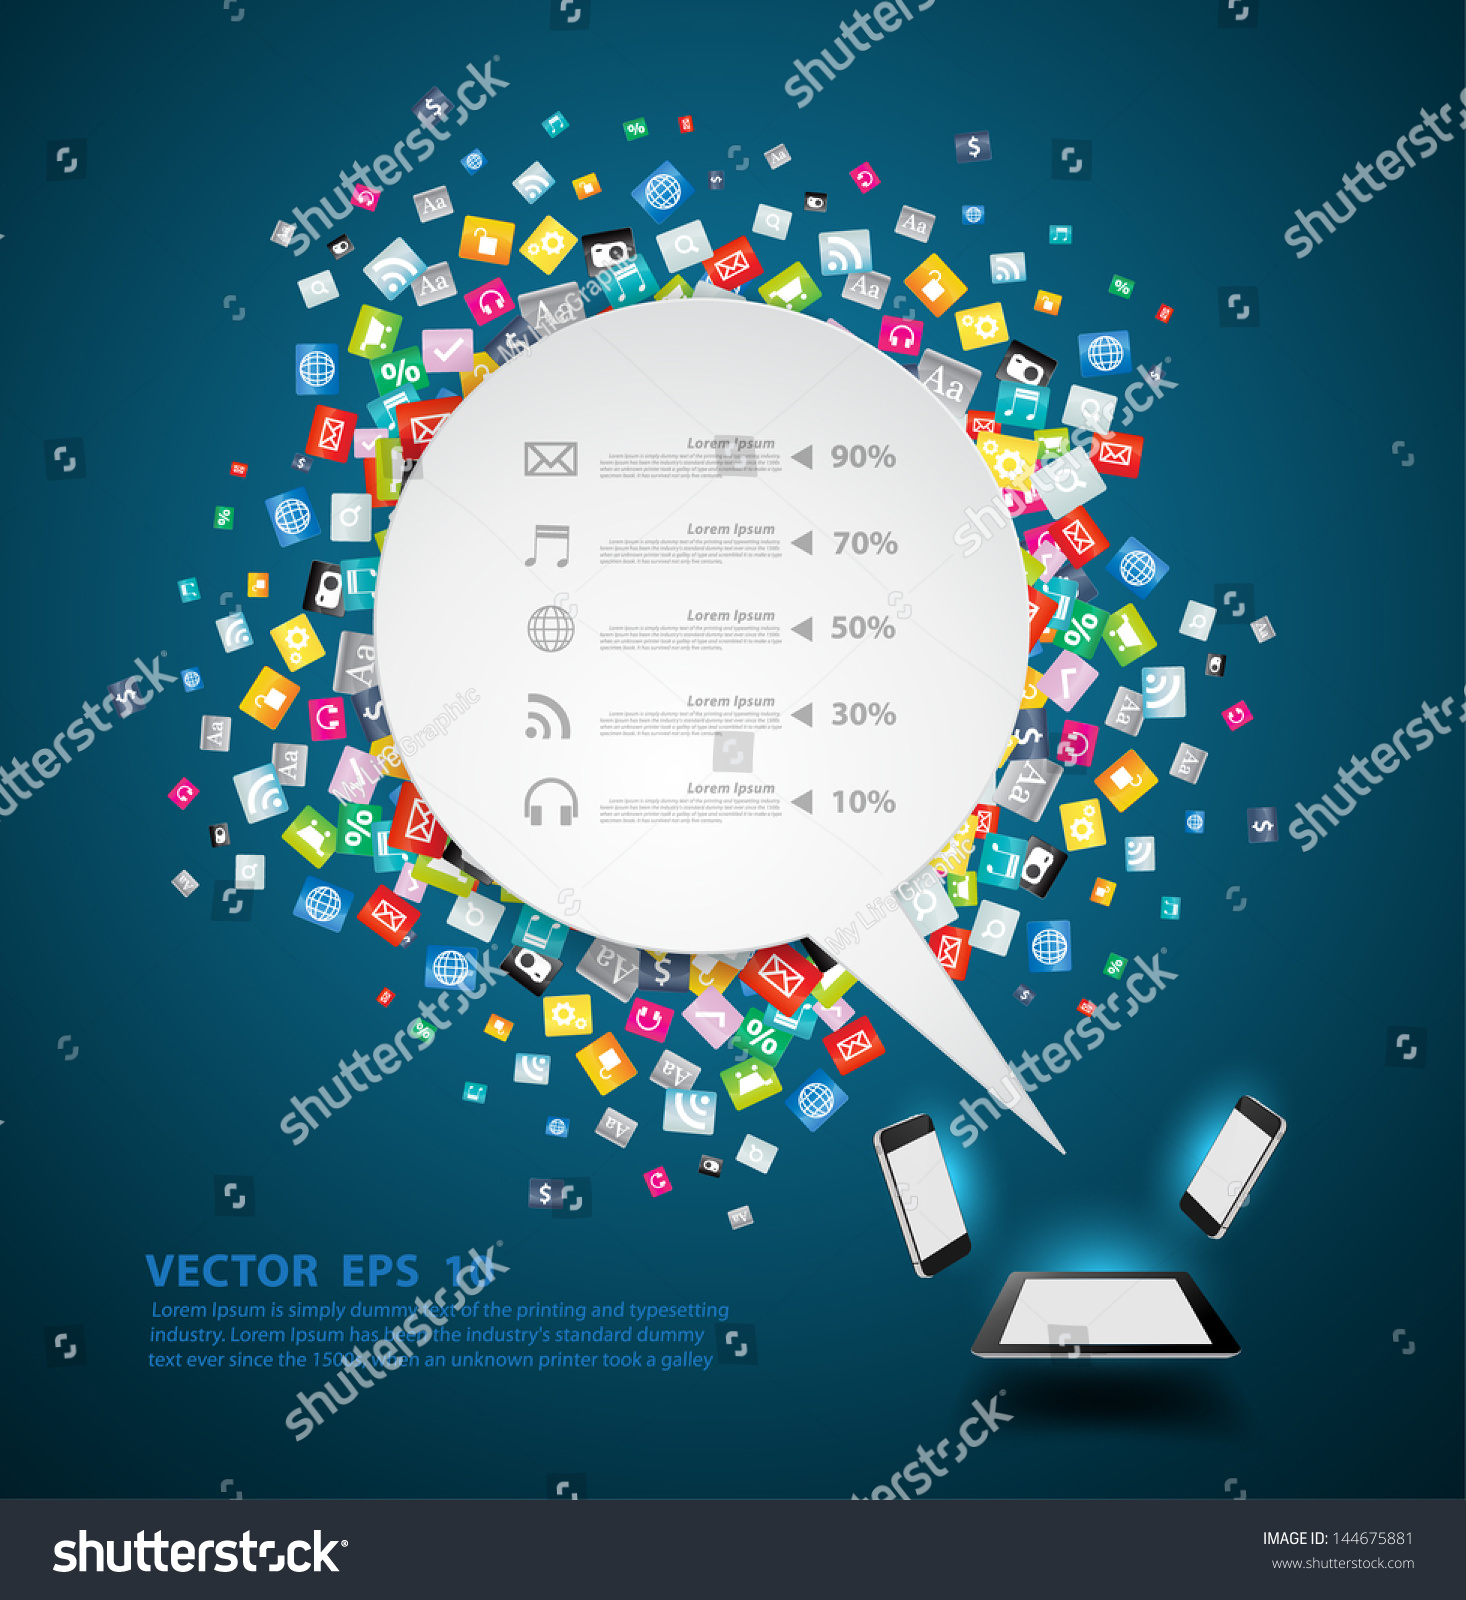 SVG of Speech bubble background with cloud of colorful application icon, Business software and social media networking service idea concept, Vector illustration modern template design svg